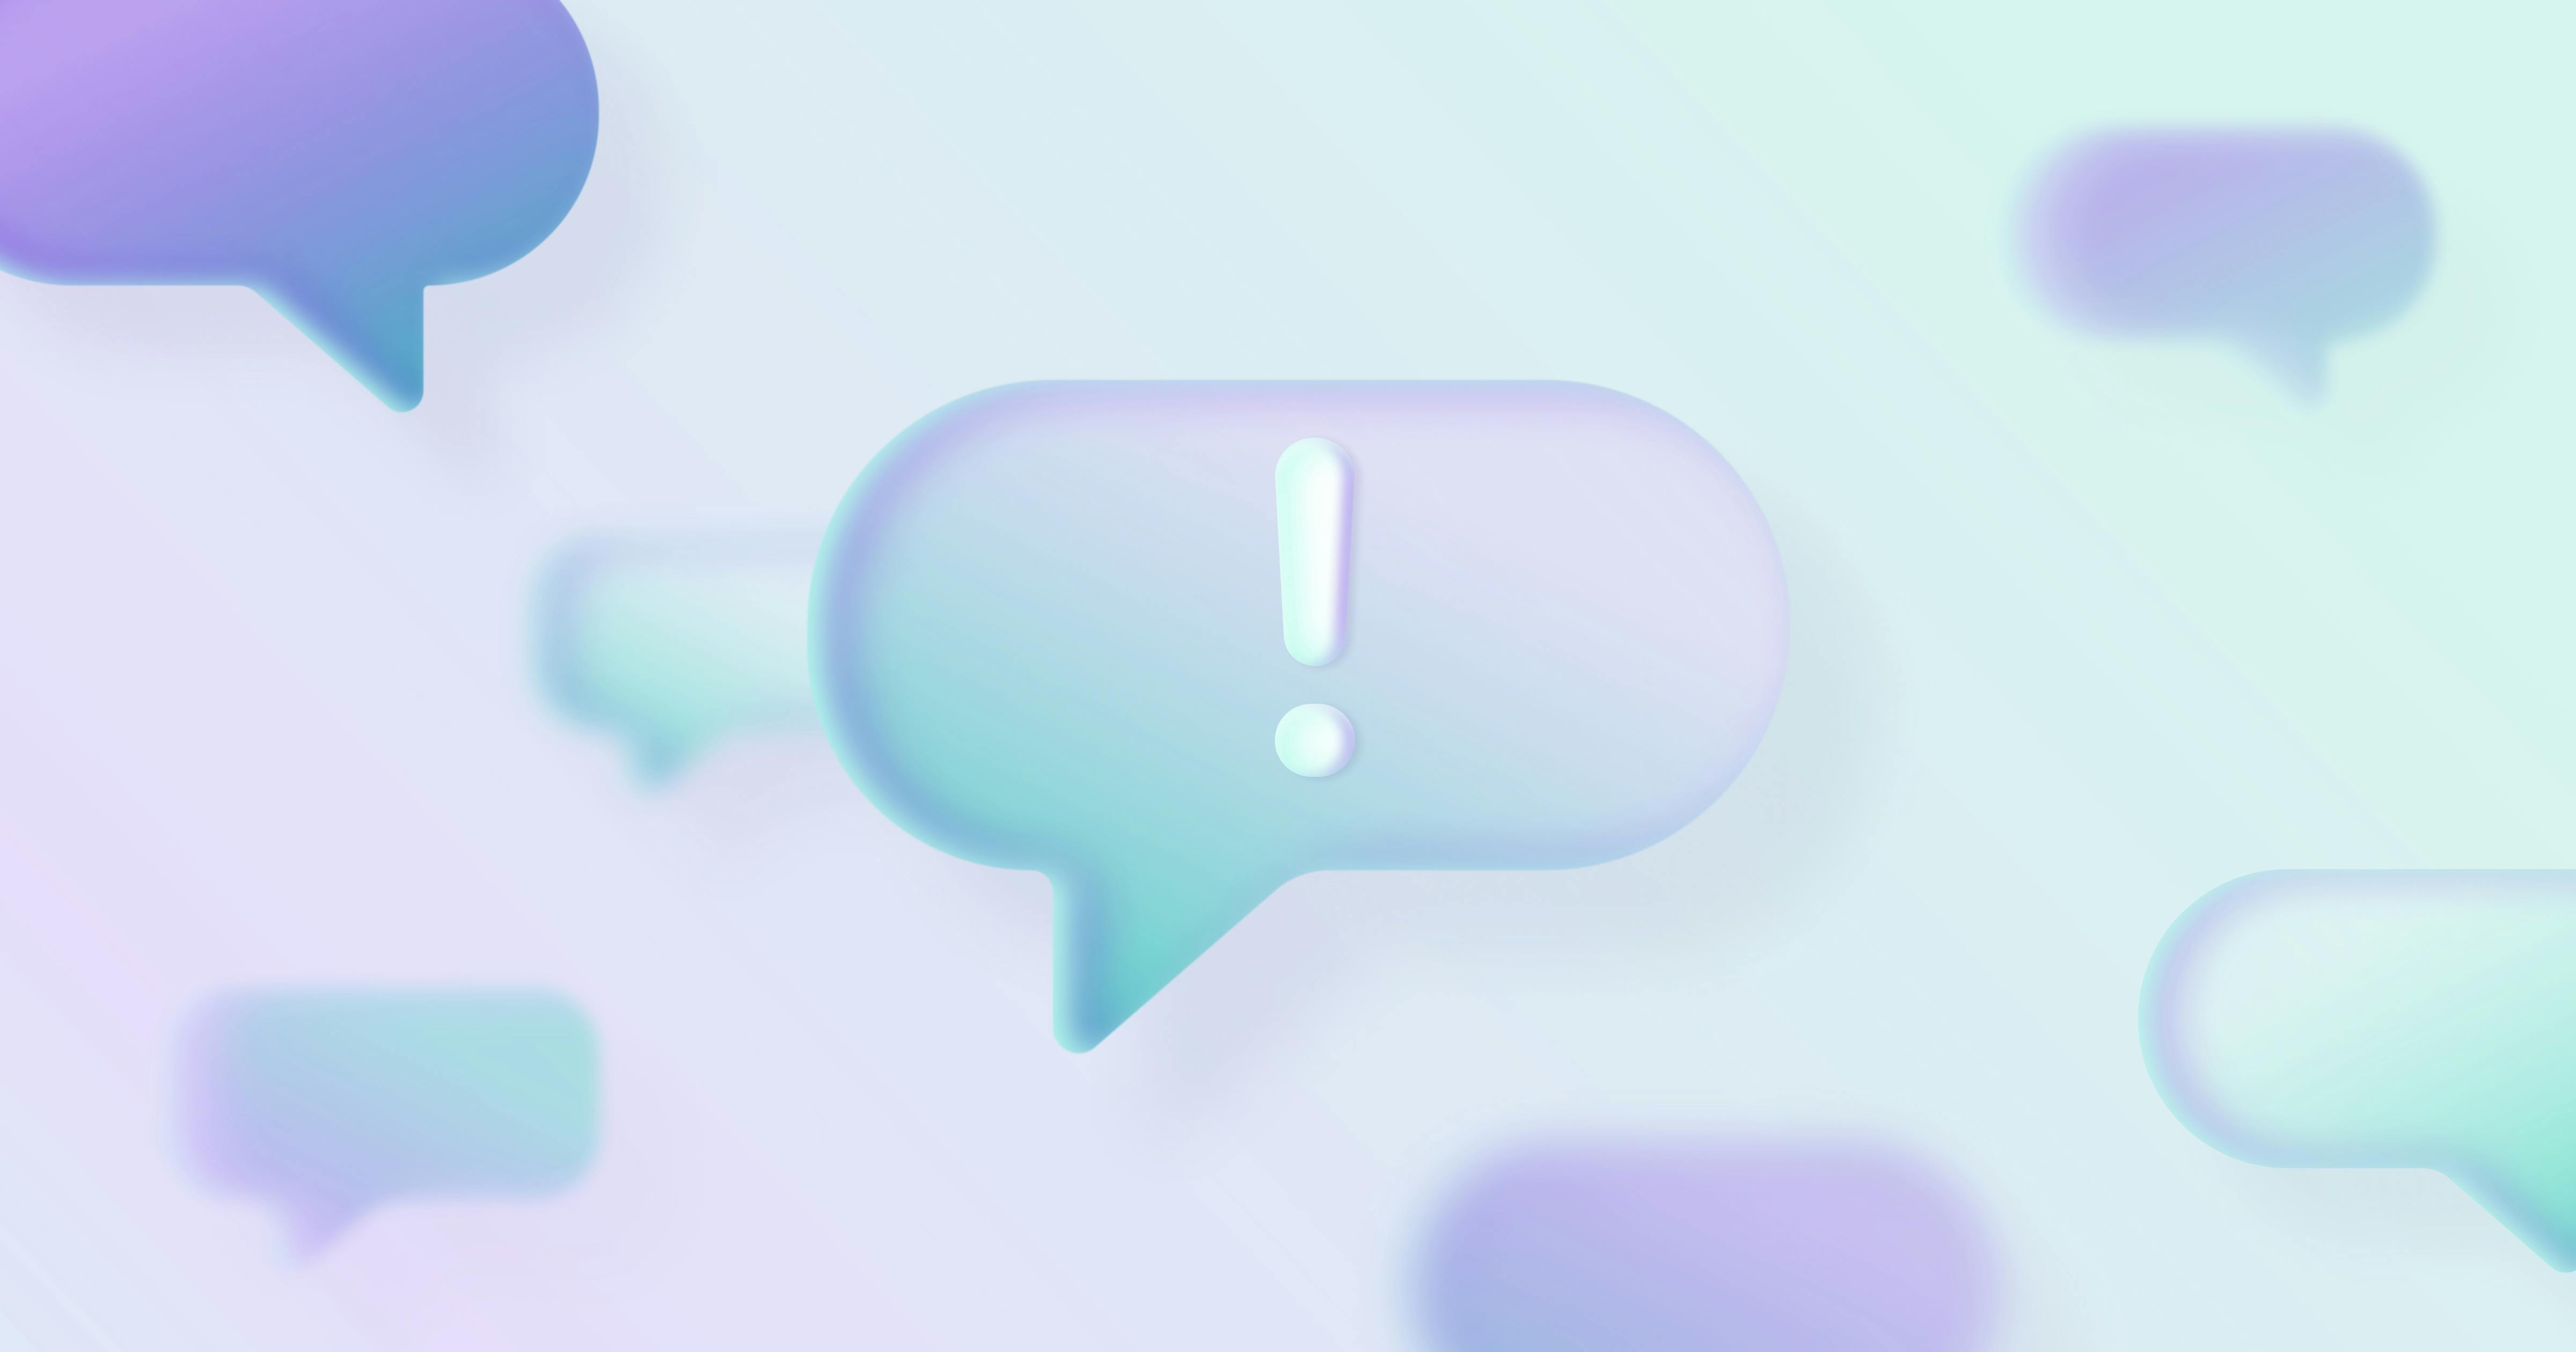 A series of speech bubbles, with an exclamation point in the center bubble.